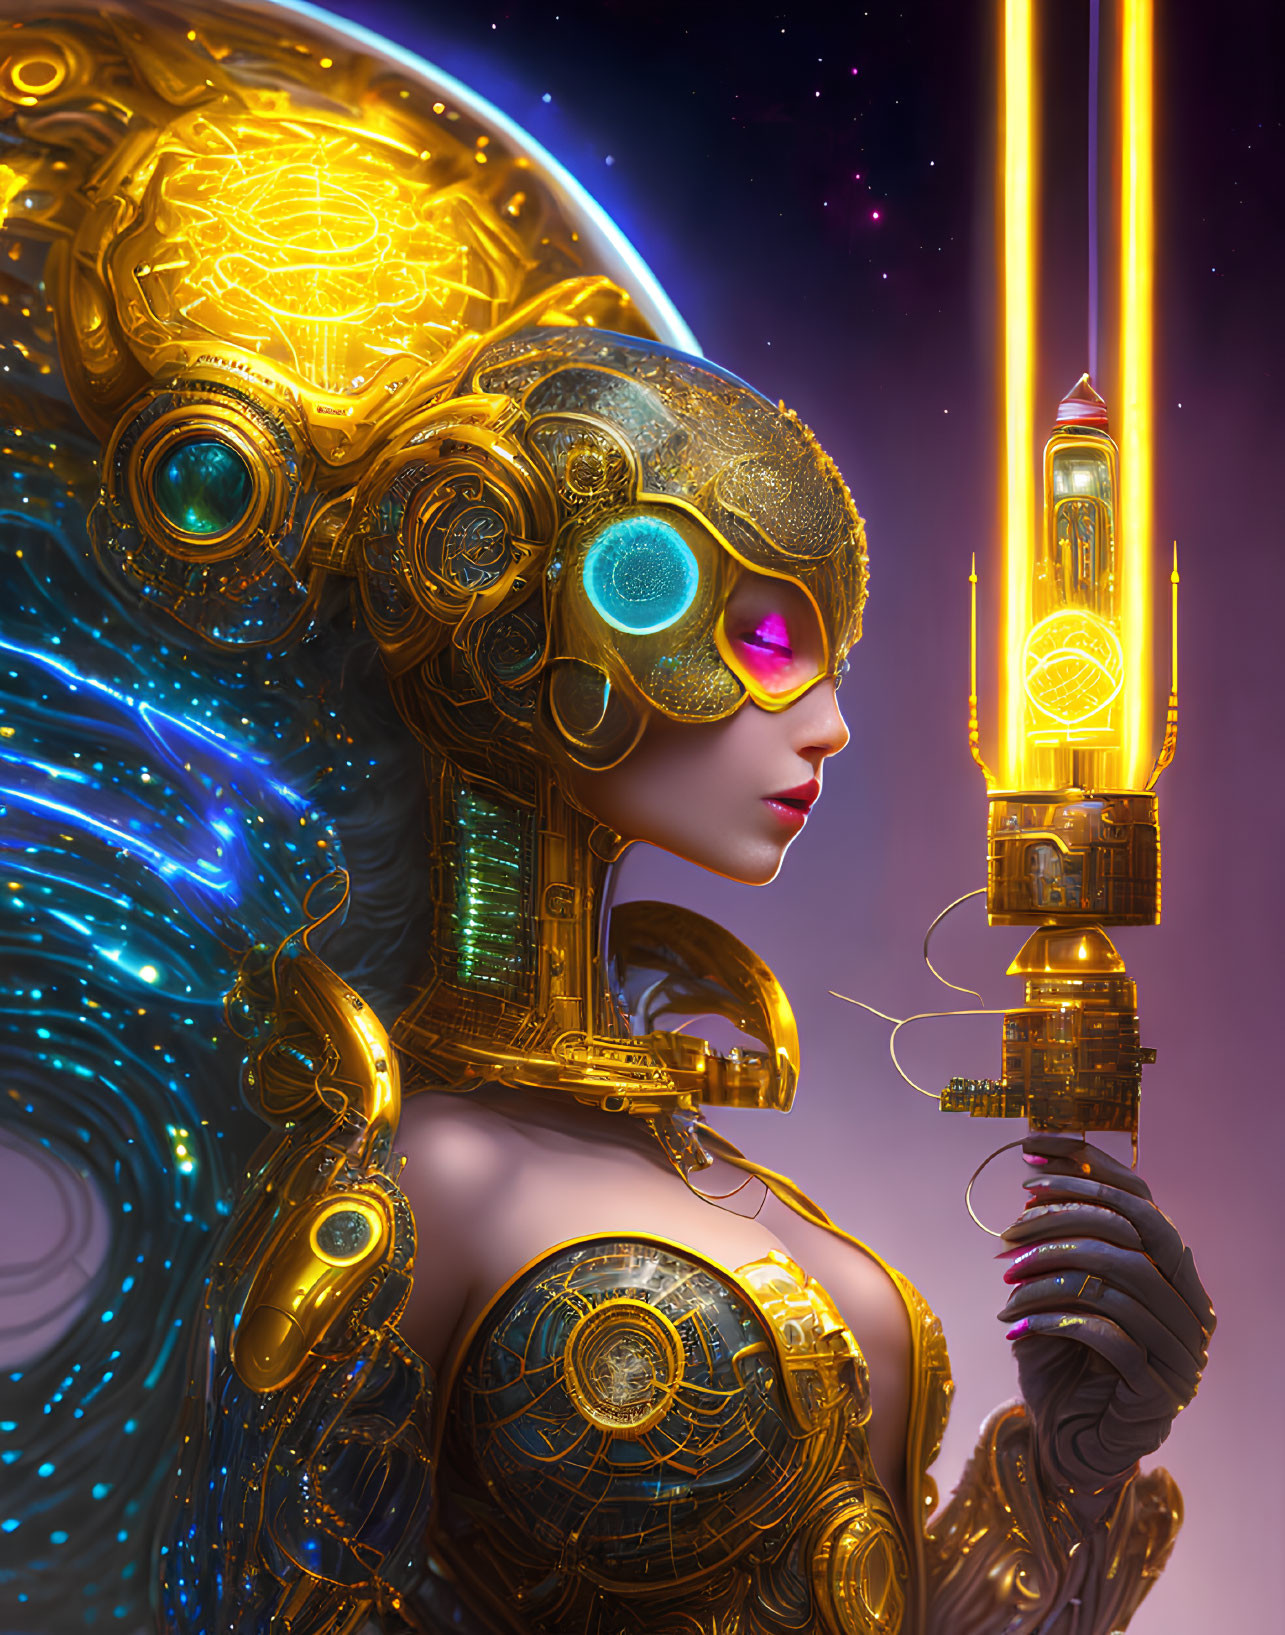 Futuristic female android with intricate gold headgear and shoulder armor holding a golden tower emitting light against